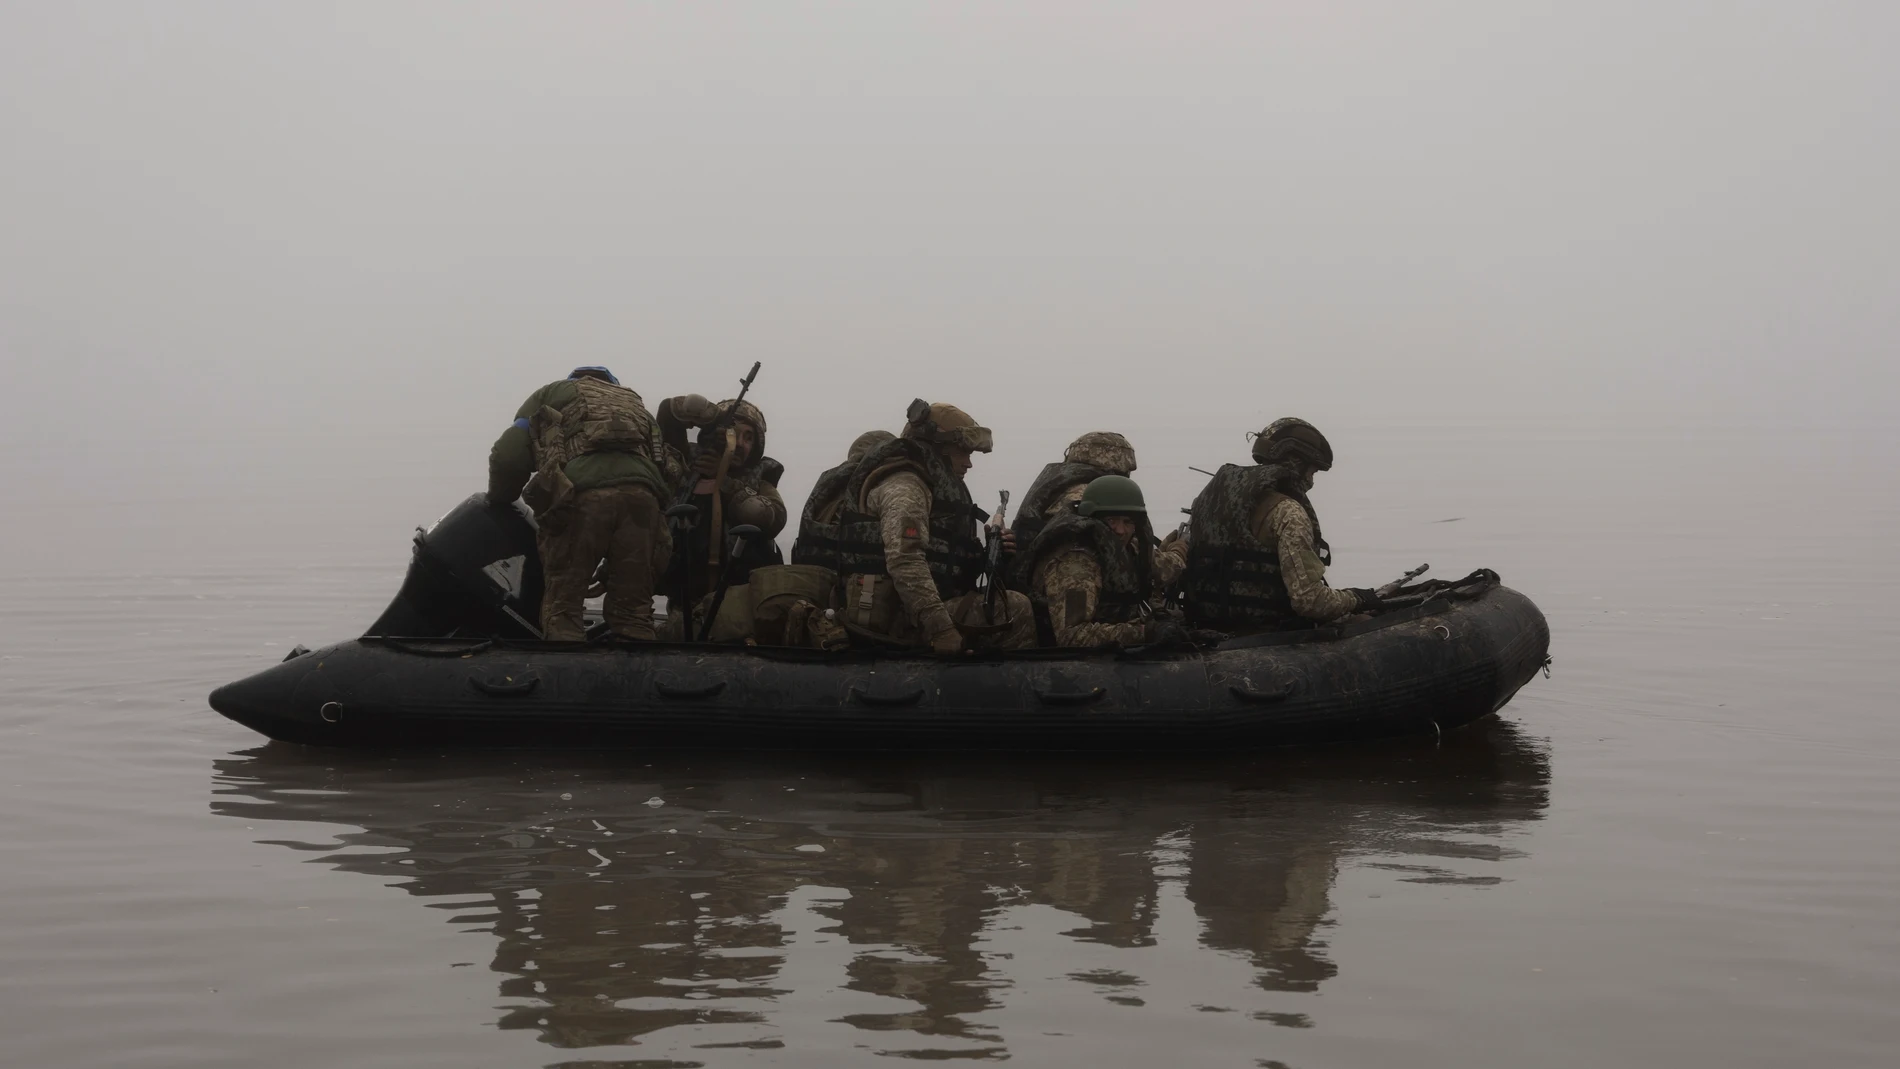 FILE - Ukrainian marines sail along the Dnipro river at the frontline near Kherson, Ukraine, Saturday, Oct. 14, 2023. A top Ukrainian official said on Wednesday, Nov. 15, 2023, its troops have established a beachhead on the eastern bank of the Dnieper River near Kherson, an important advance in bridging one of Russia's most significant strategic barriers in the war. (AP Photo/Alex Babenko, File)